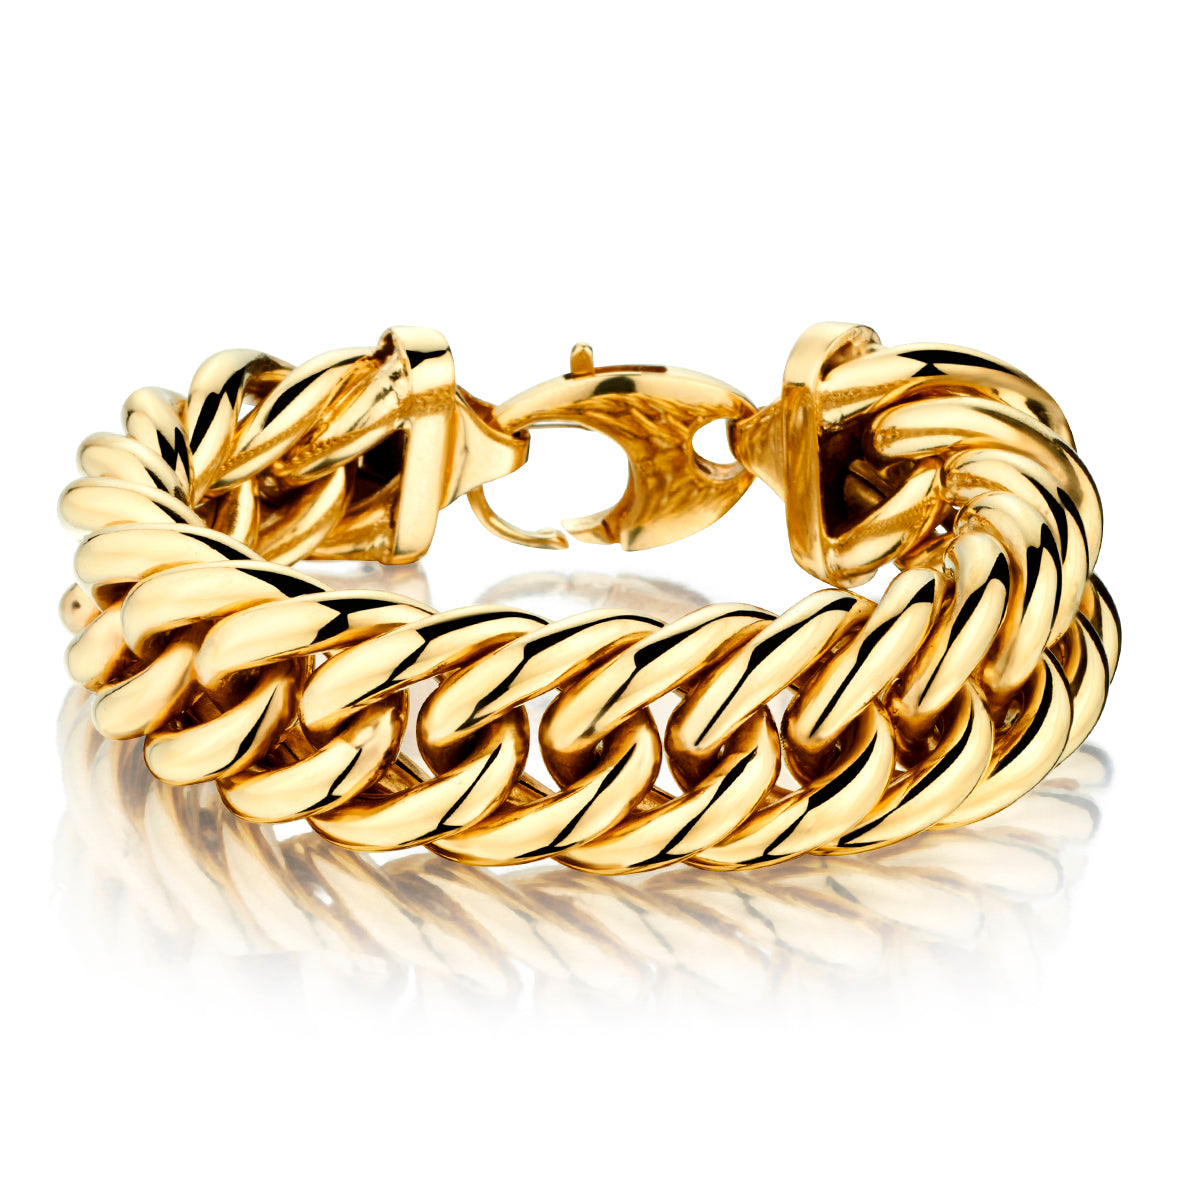 14kt Yellow Gold Large Link Bracelet. Weight: 62.4 grams.